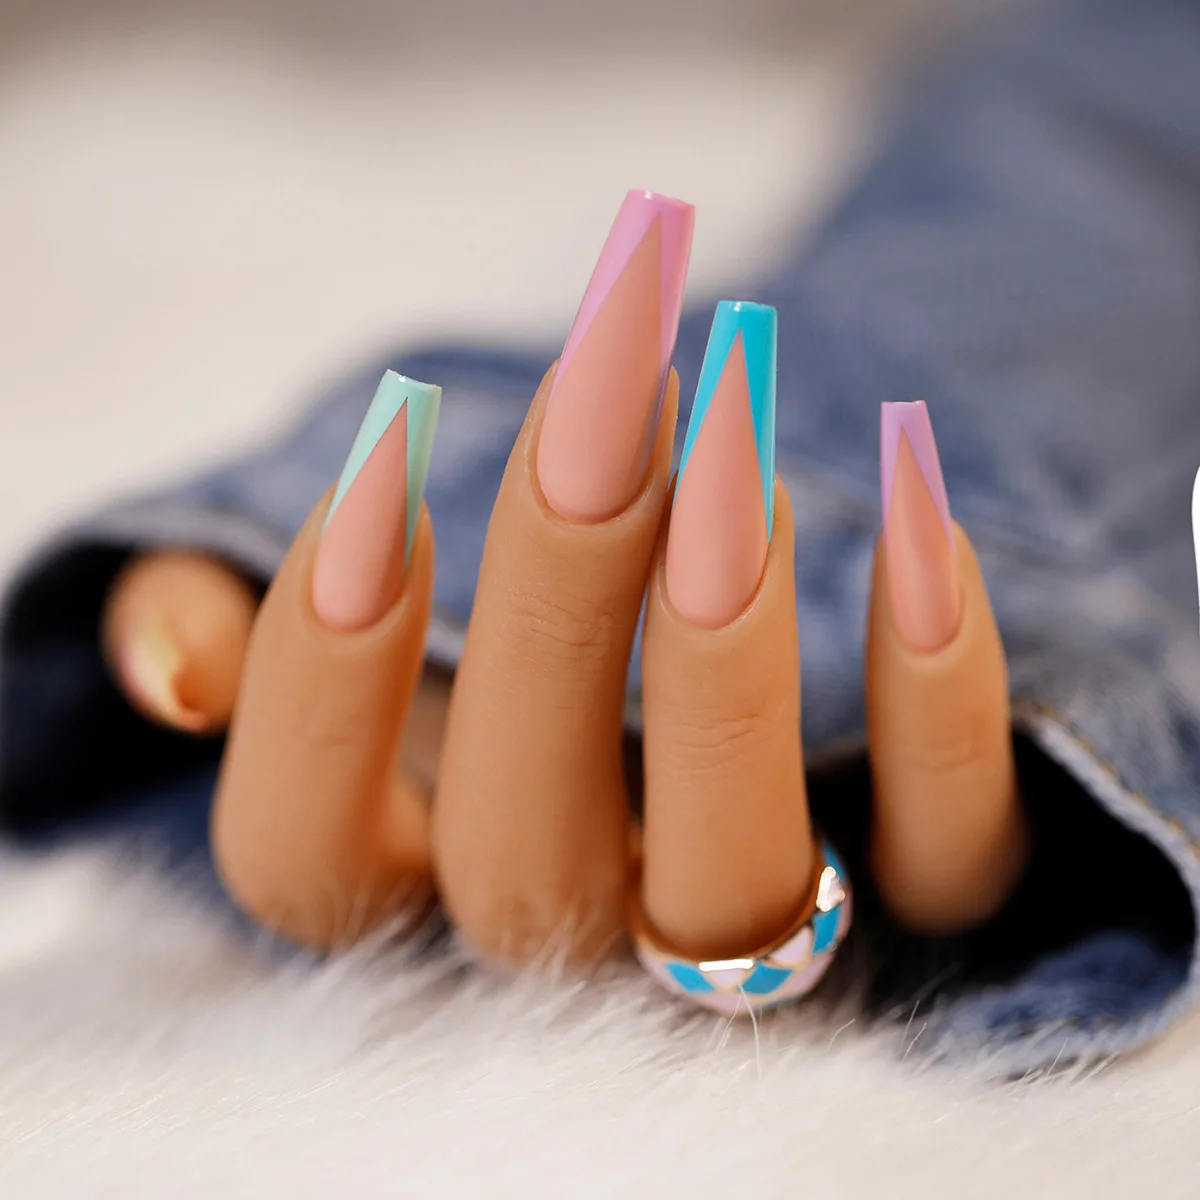 

New Arrival Long Coffin Nail Tips Rainbow French Design Full Cover Press On Nails Private Label Fashion Nails